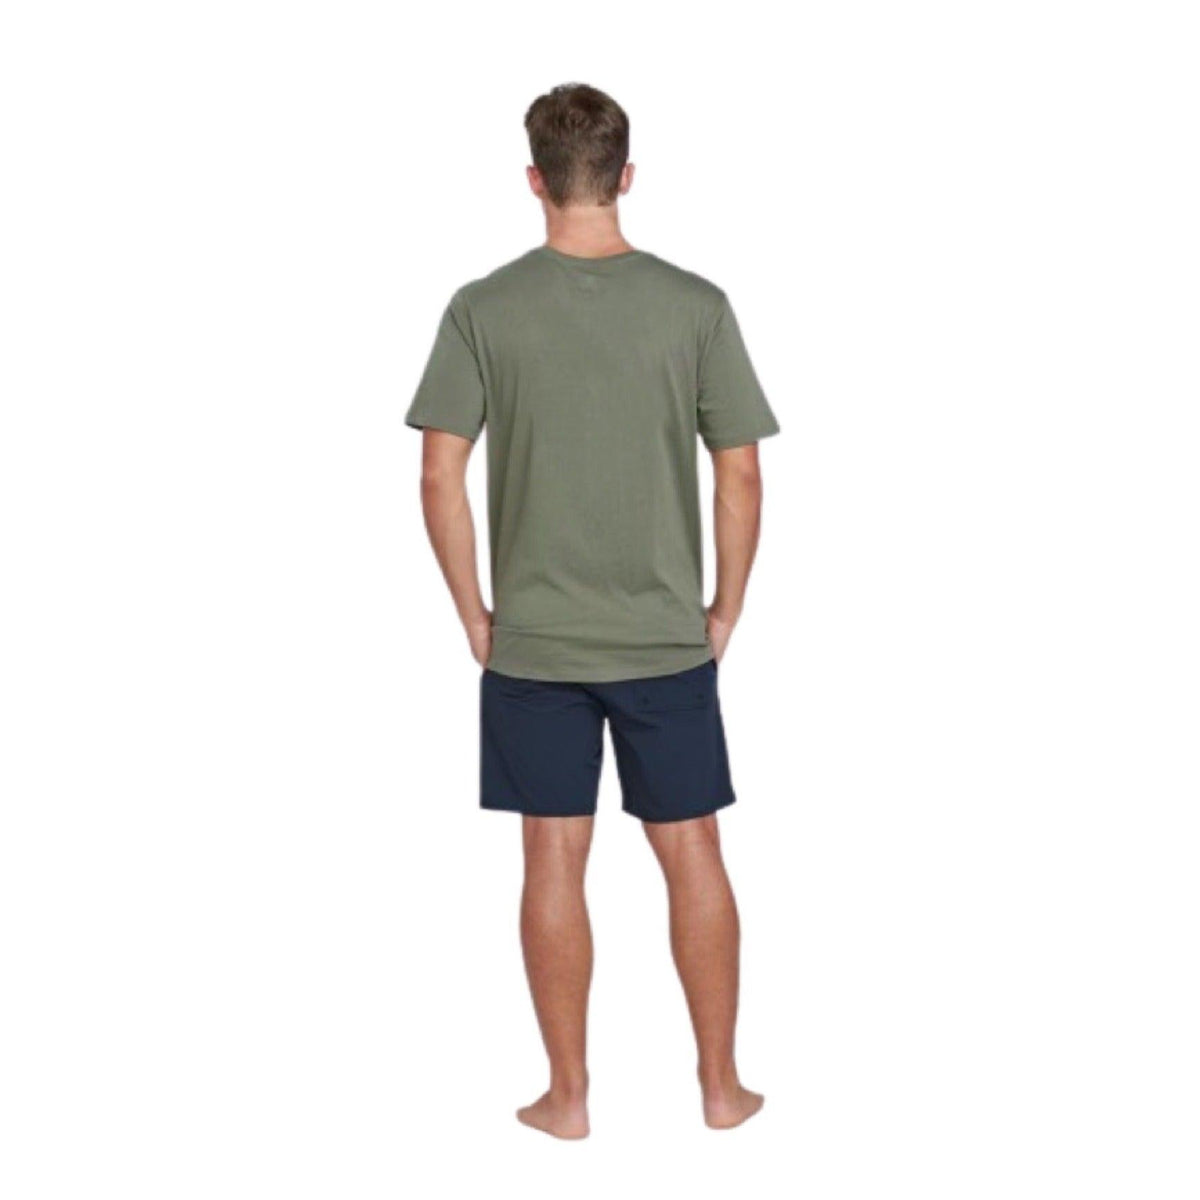 The back view of a man wearing an olive-colored, short-sleeved shirt.